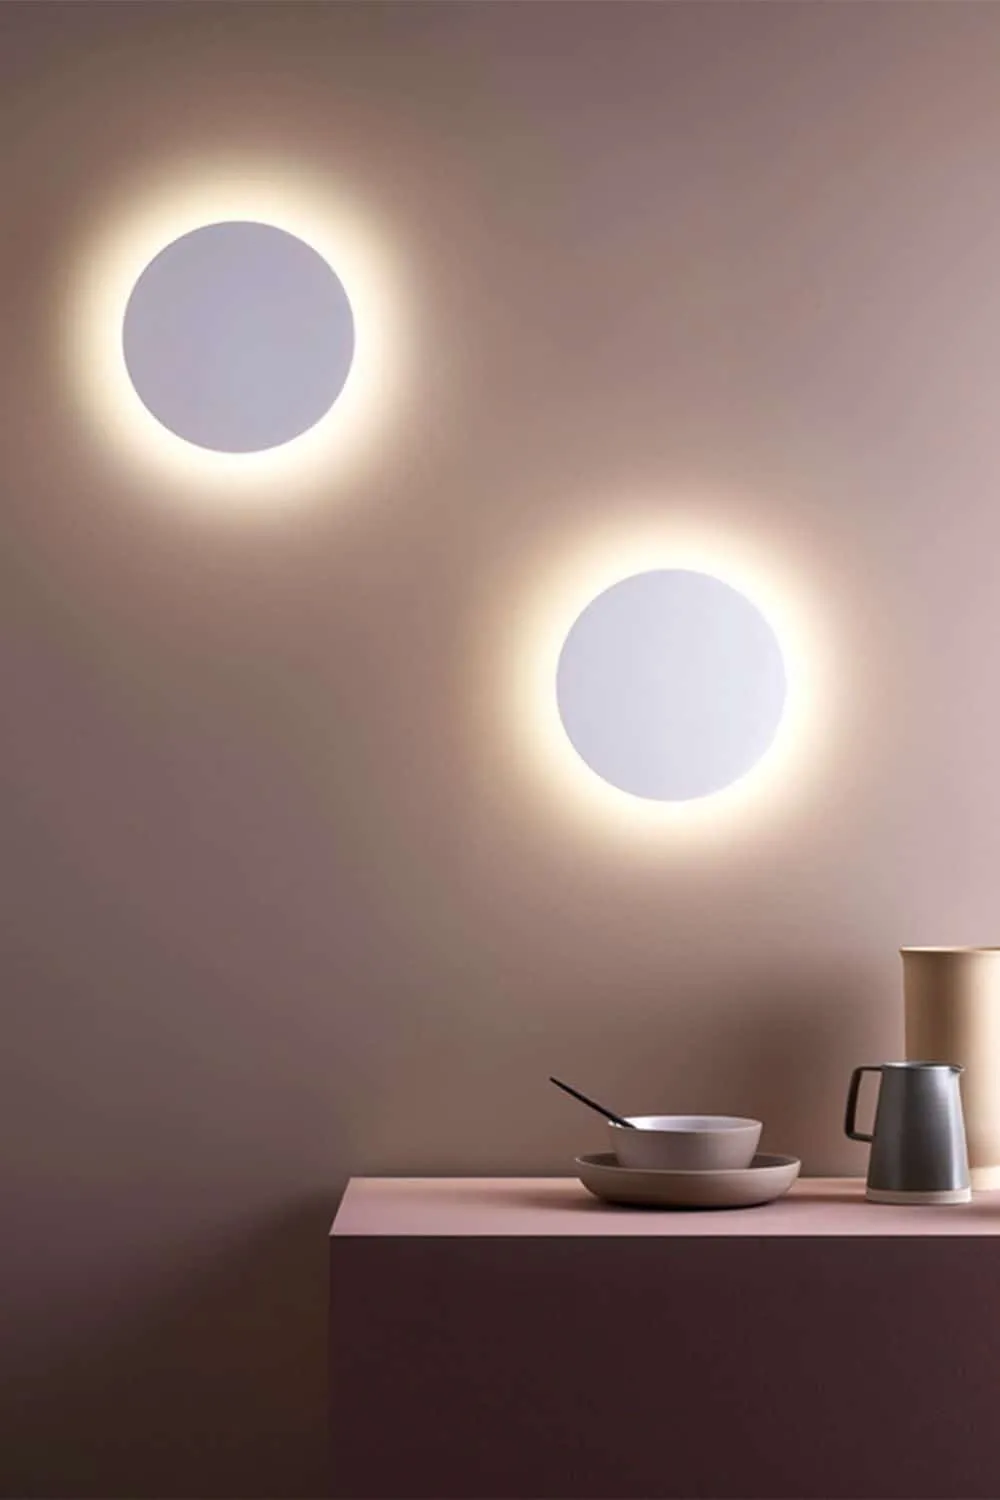 wall light LED lamps with different designs are suitable for home decor.